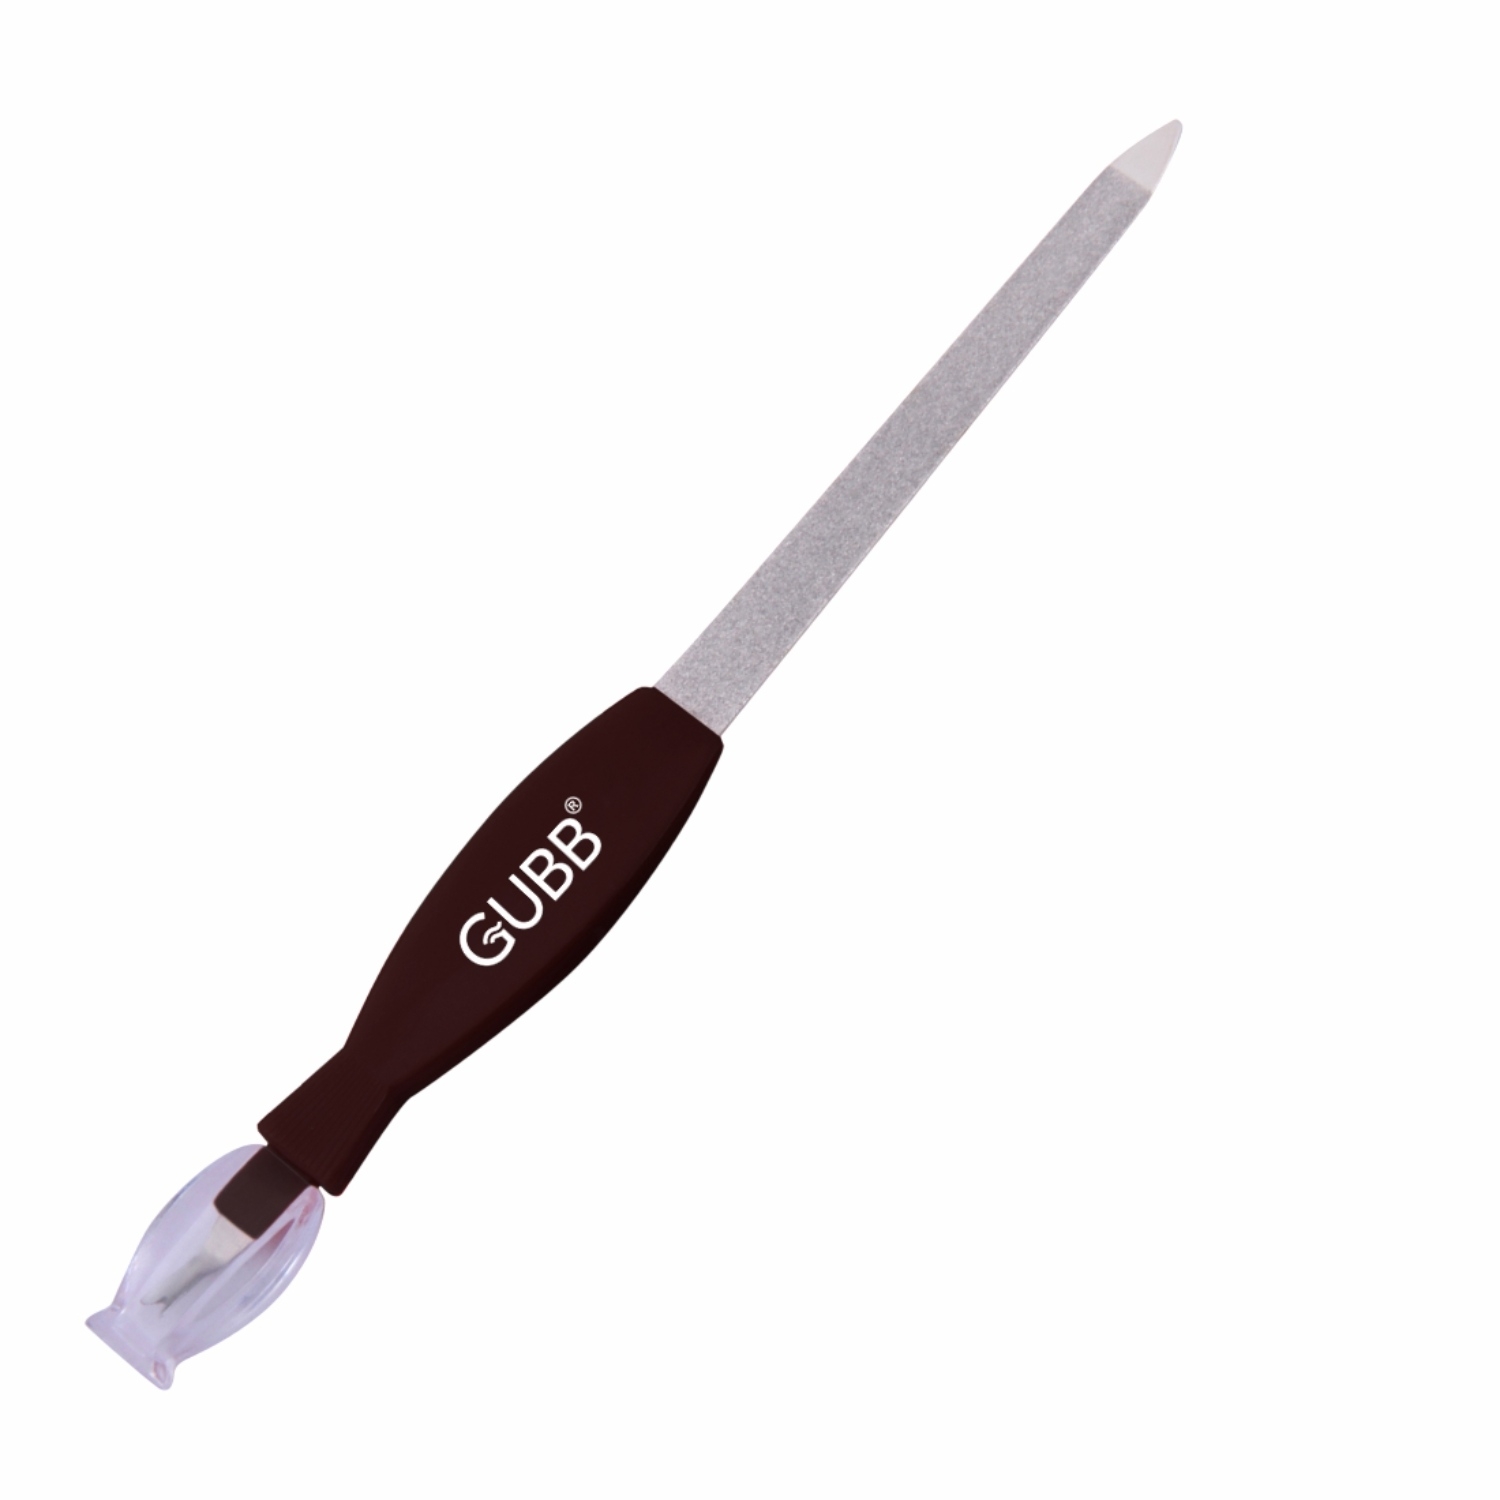 GUBB Nail Pusher & Cuticle Remover - Price in India, Buy GUBB Nail Pusher &  Cuticle Remover Online In India, Reviews, Ratings & Features | Flipkart.com